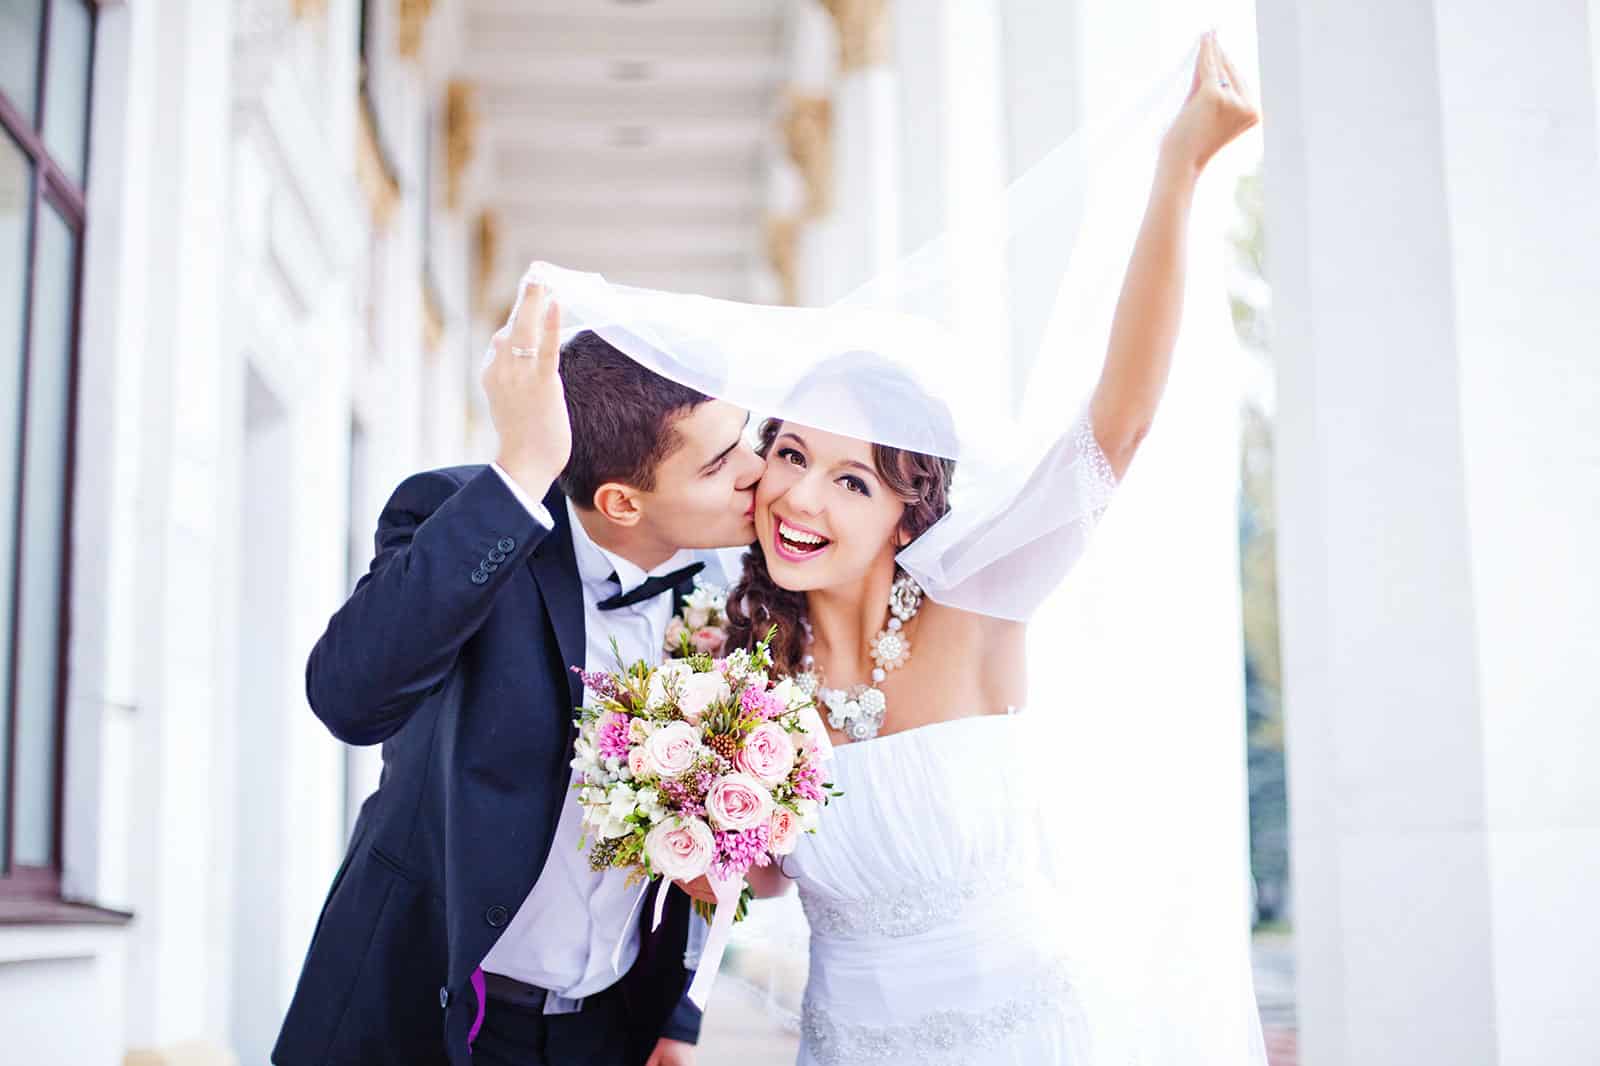 It’s Wedding Season in Edna! How to Get a Picture-Perfect Smile for a Trip Down the Aisle